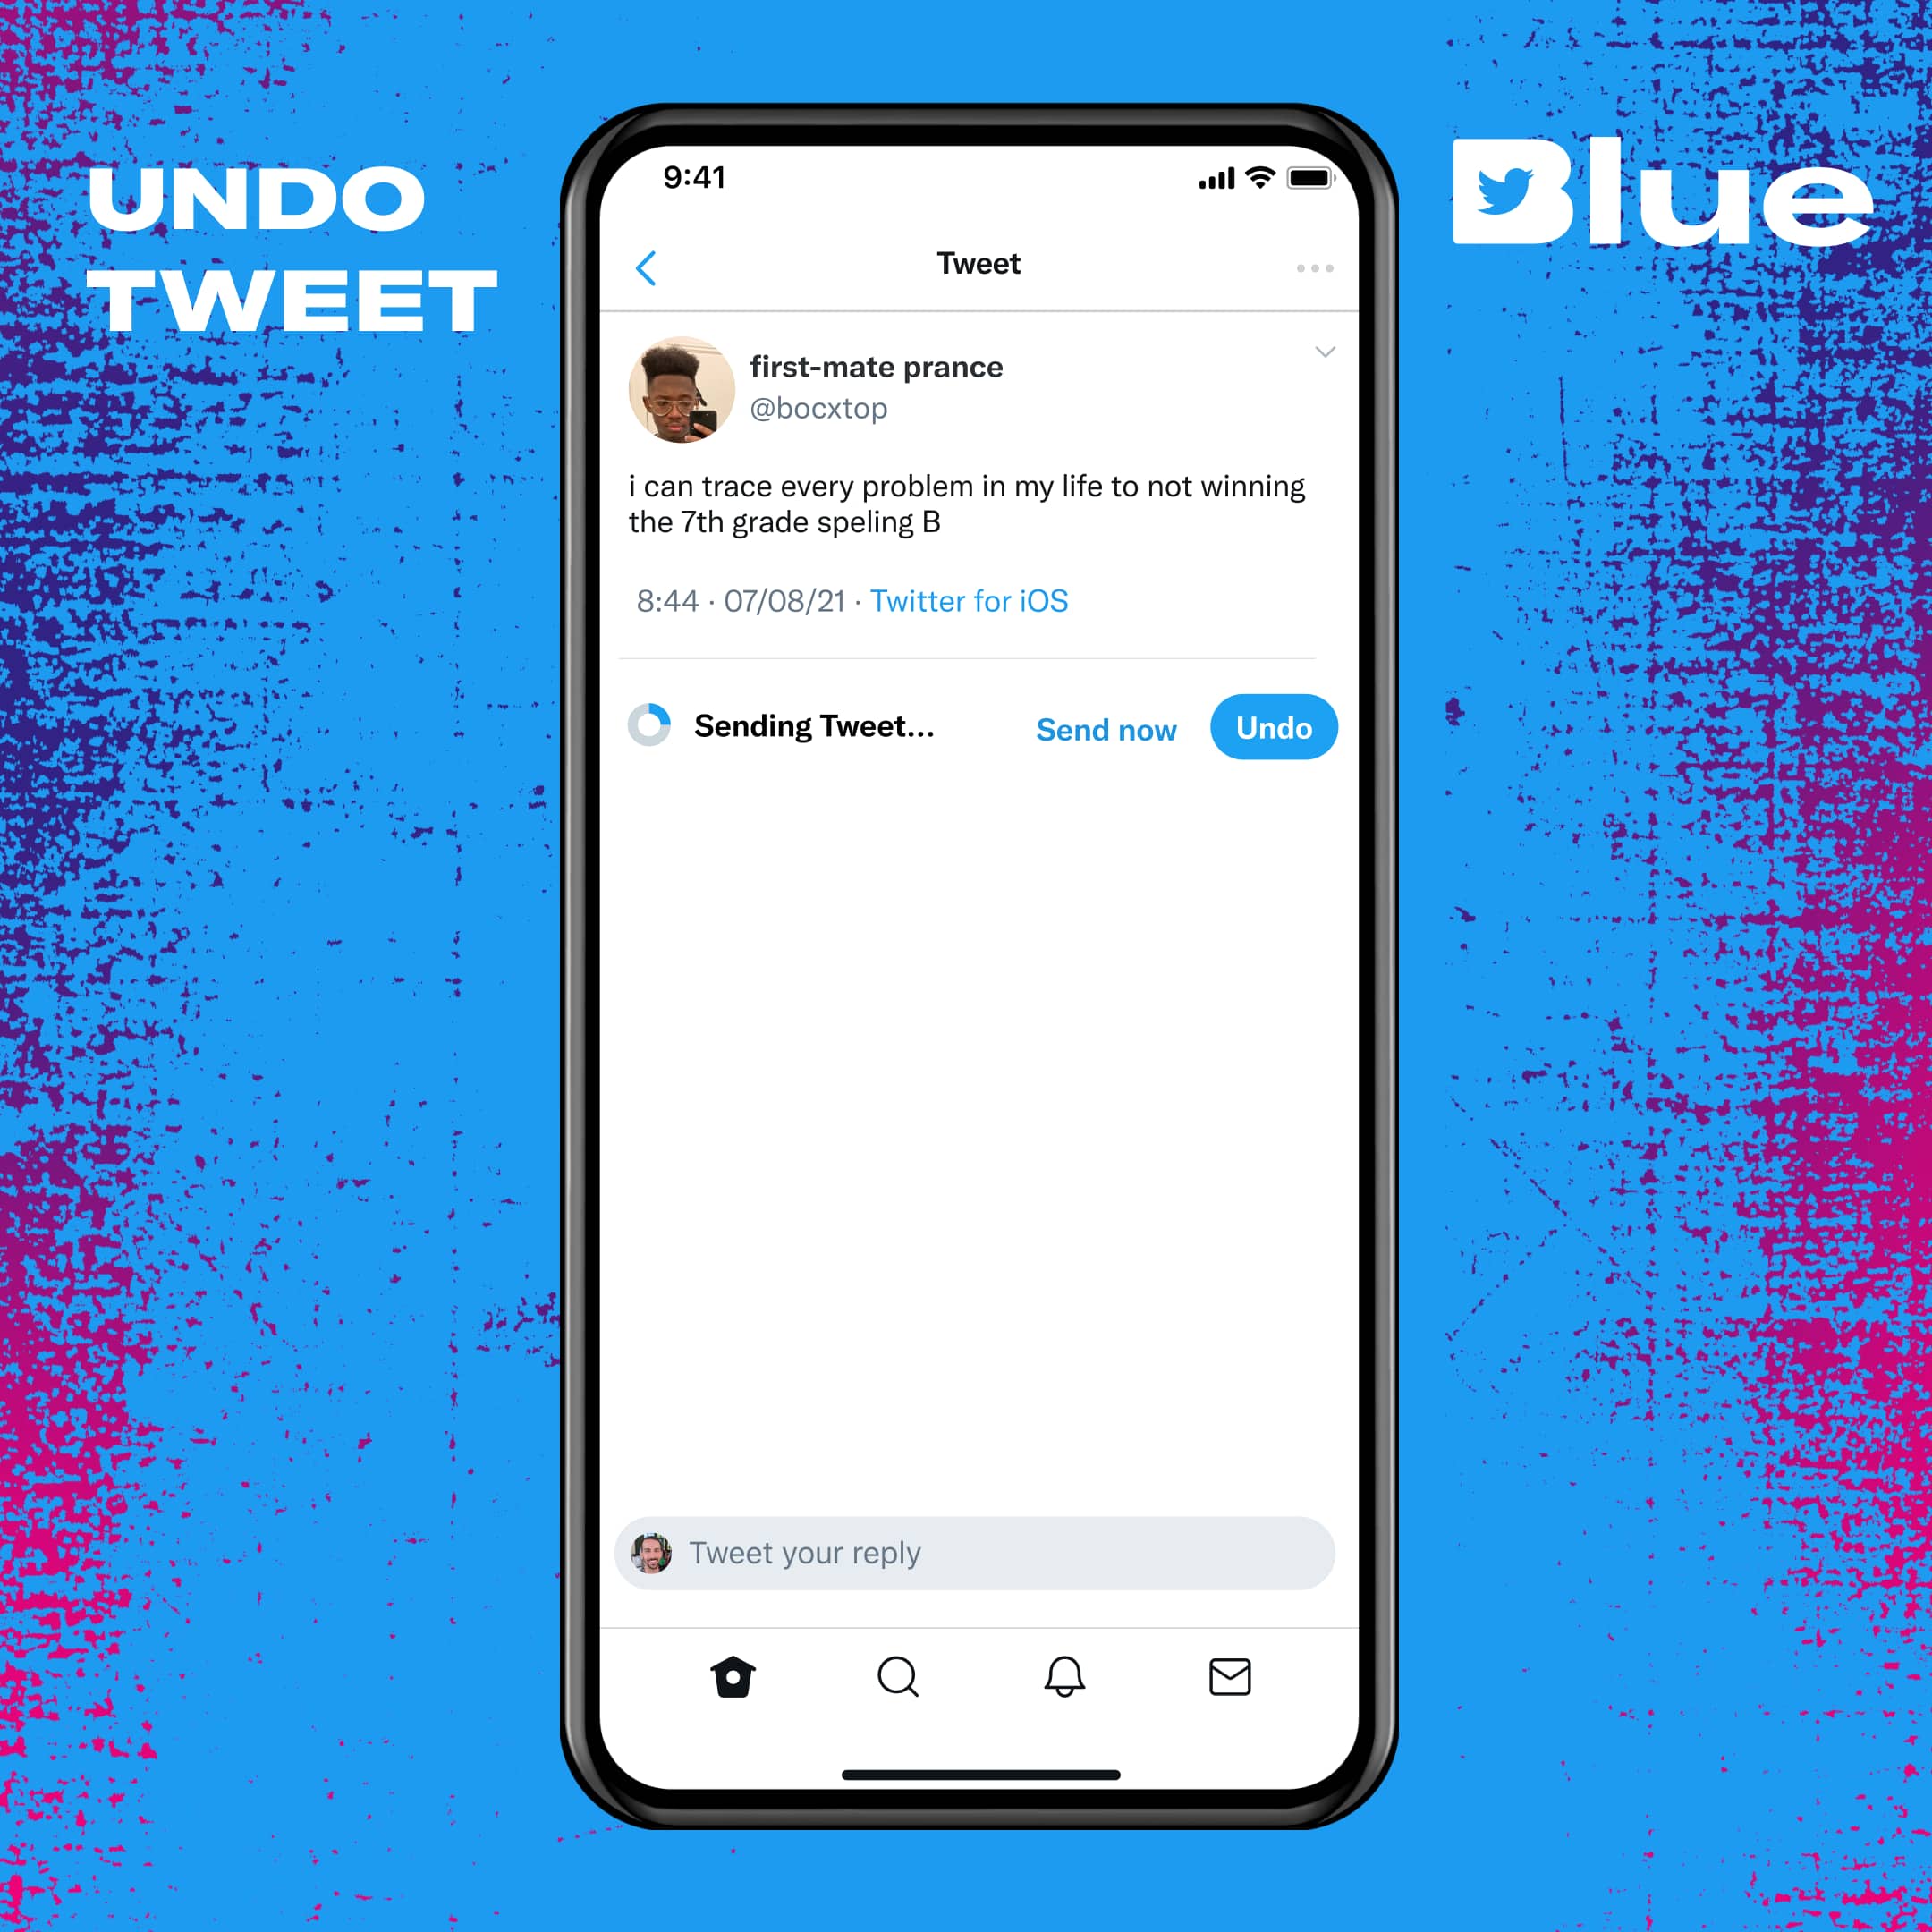 Promotional graphic for the Undo Tweet feature available with the Twitter Blue subscription on iPhone